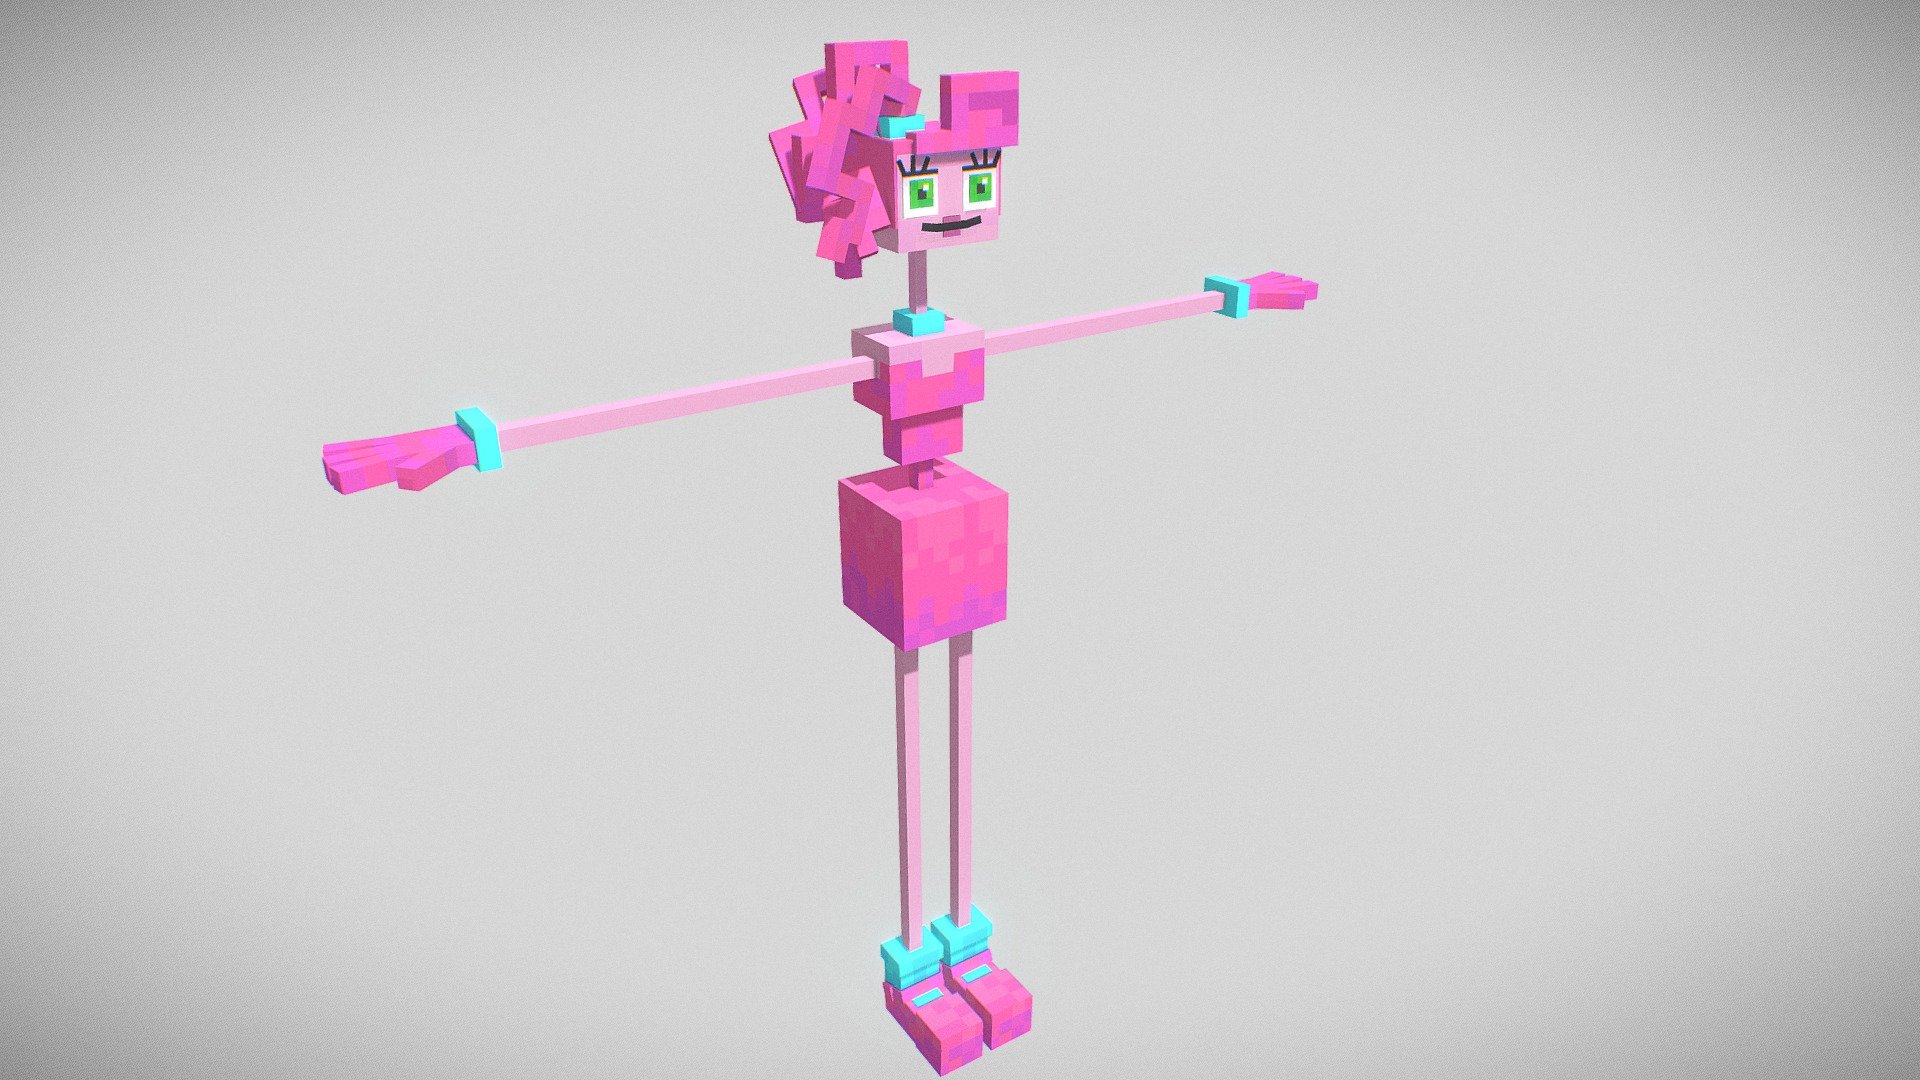 Project Playtime: Lady Luck Mommy Long Legs - Download Free 3D model by  TechnoShark [1fd2d8d] - Sketchfab